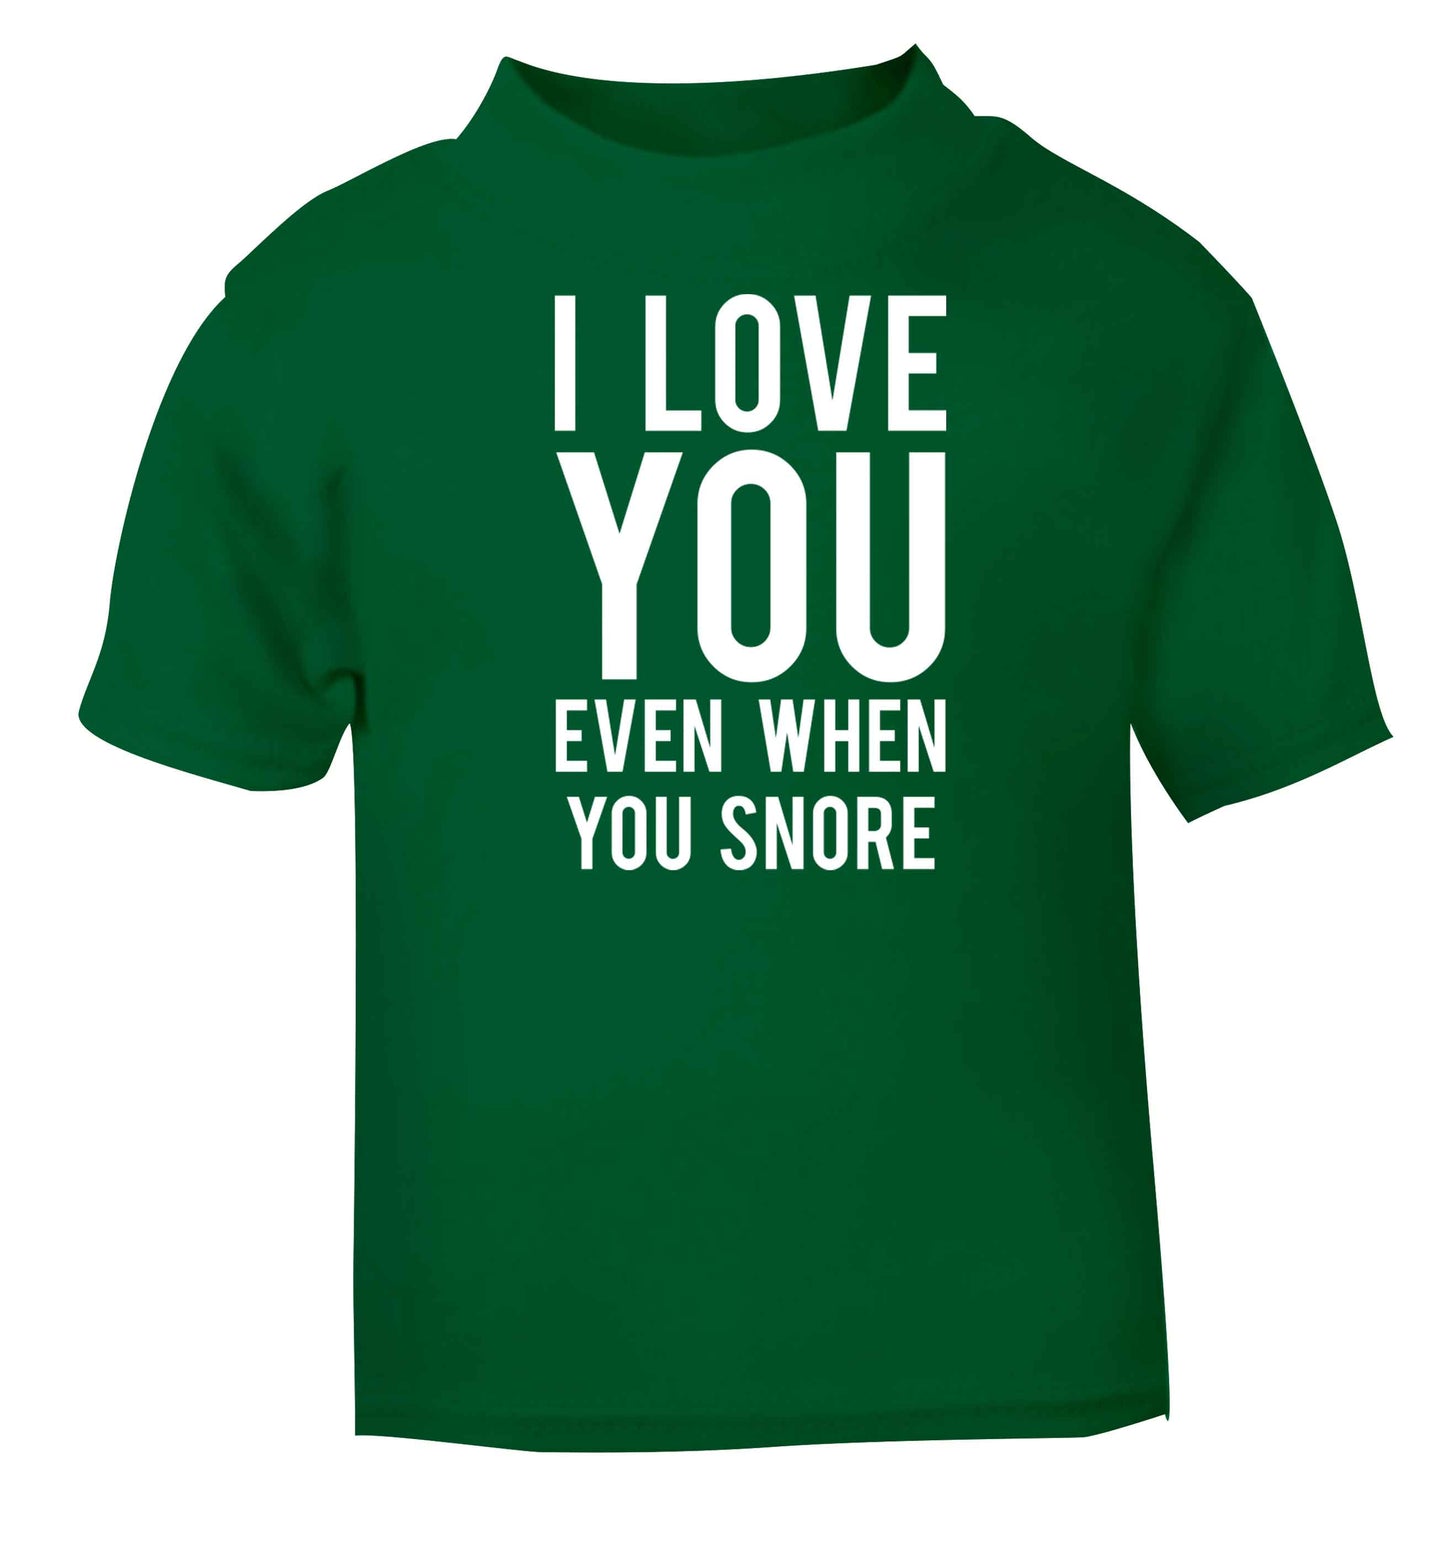 I love you even when you snore green baby toddler Tshirt 2 Years